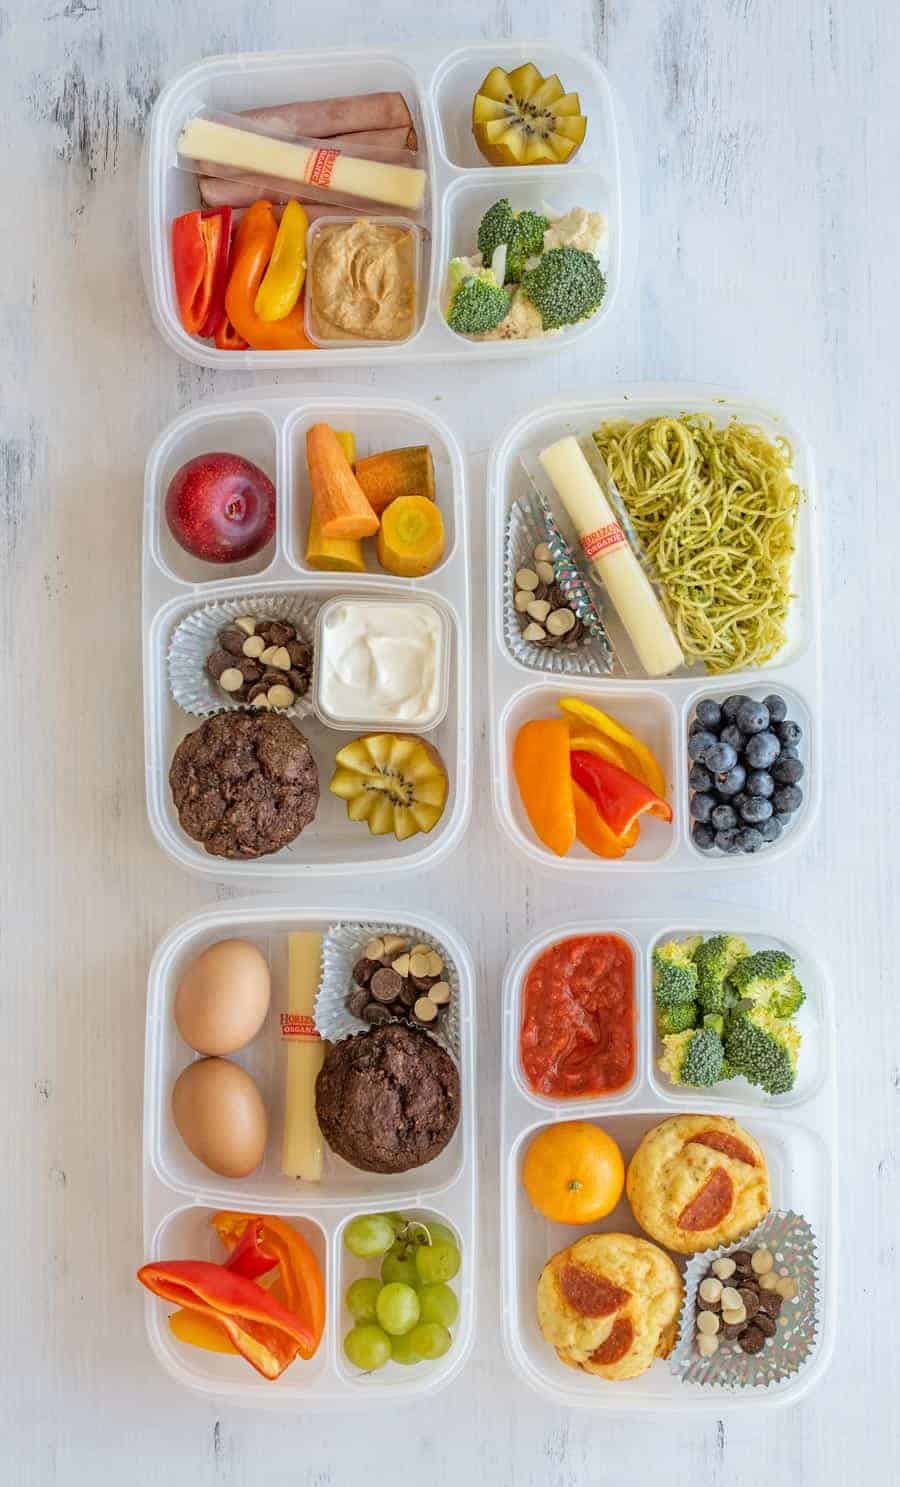 Make Ahead Lunch Box Ideas: Pack on Sunday, No morning prep